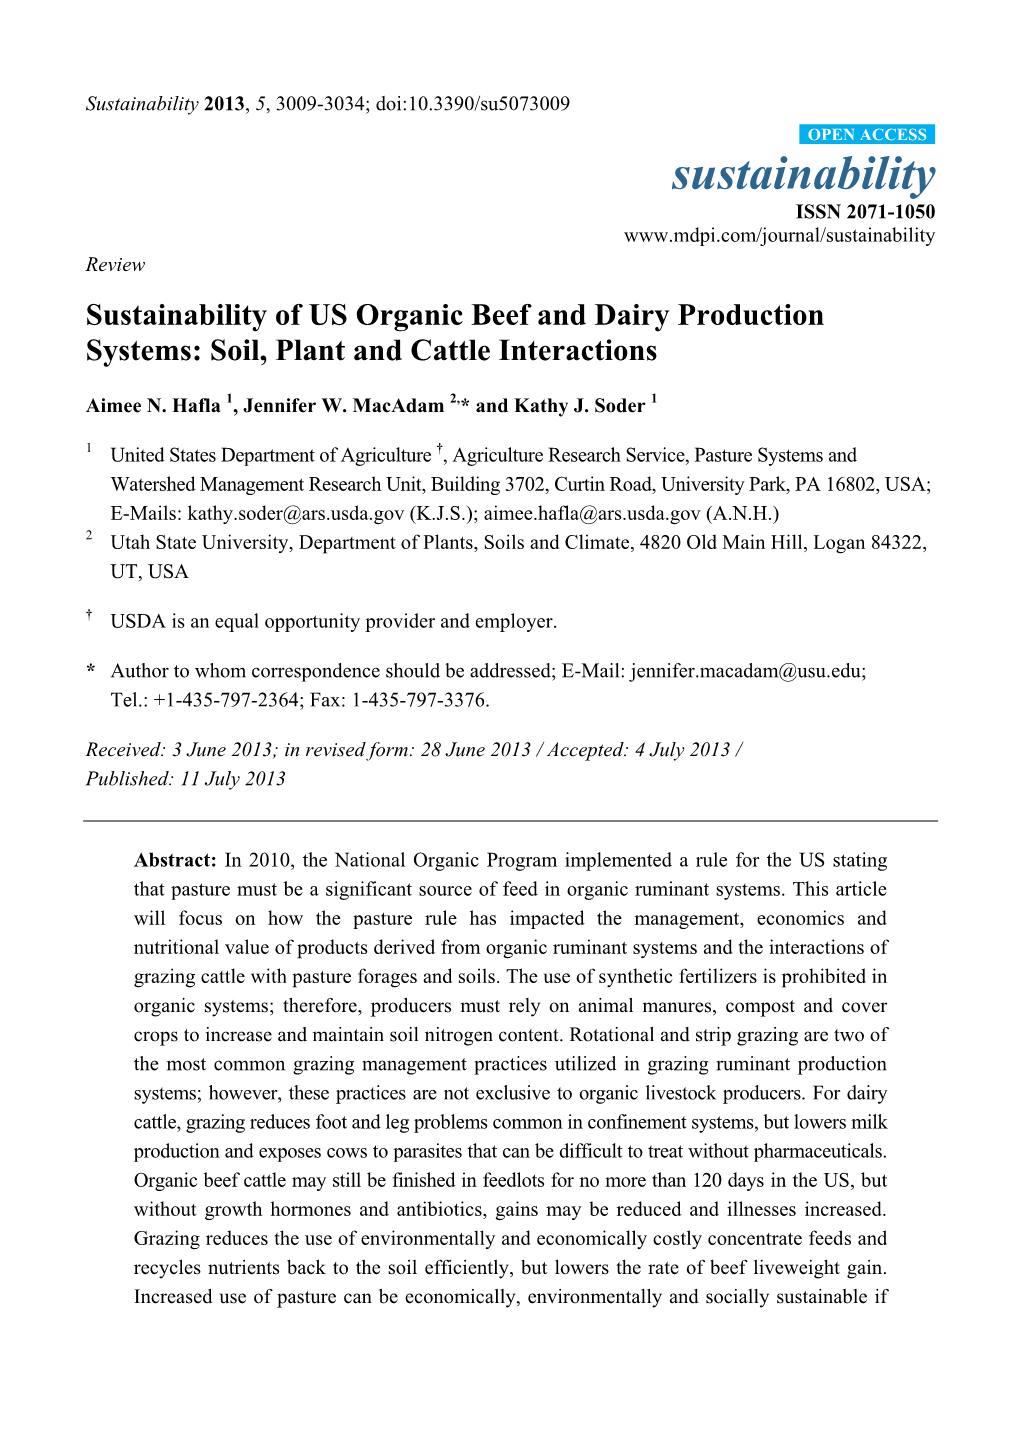 Sustainability of US Organic Beef and Dairy Production Systems: Soil, Plant and Cattle Interactions